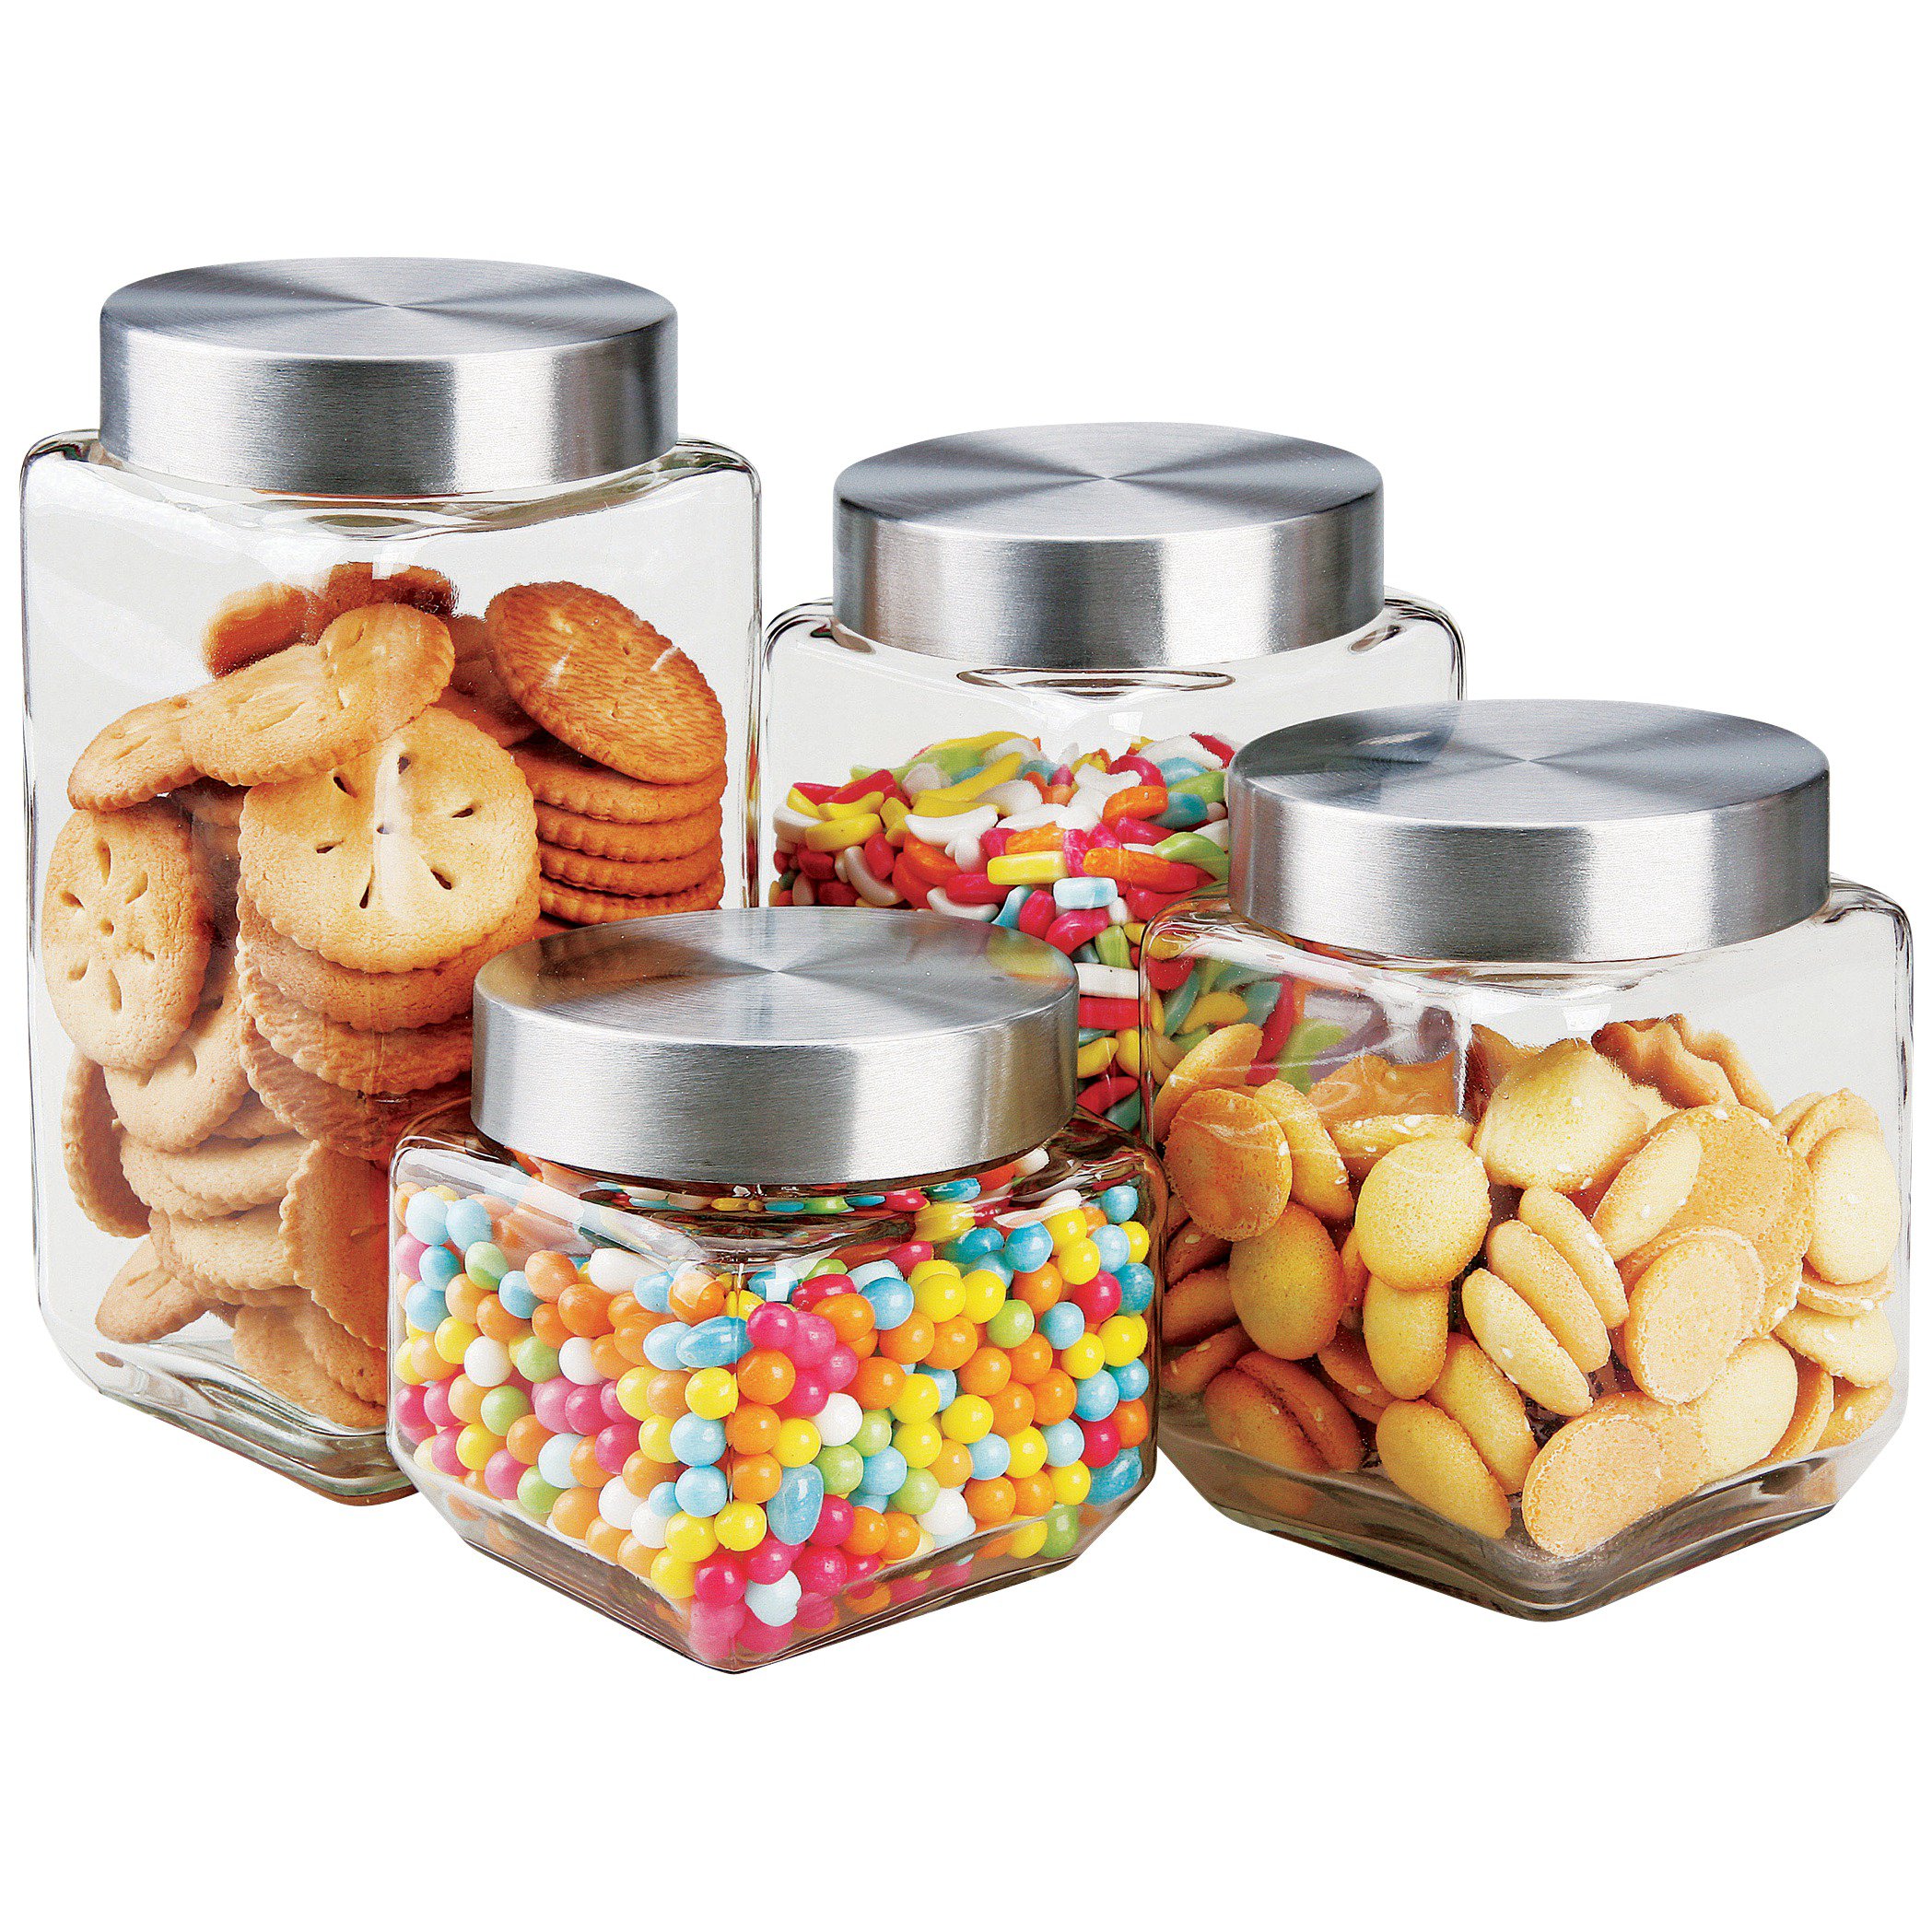 Farberware 4 Piece Glass Canister Set - Shop Food Storage at H-E-B